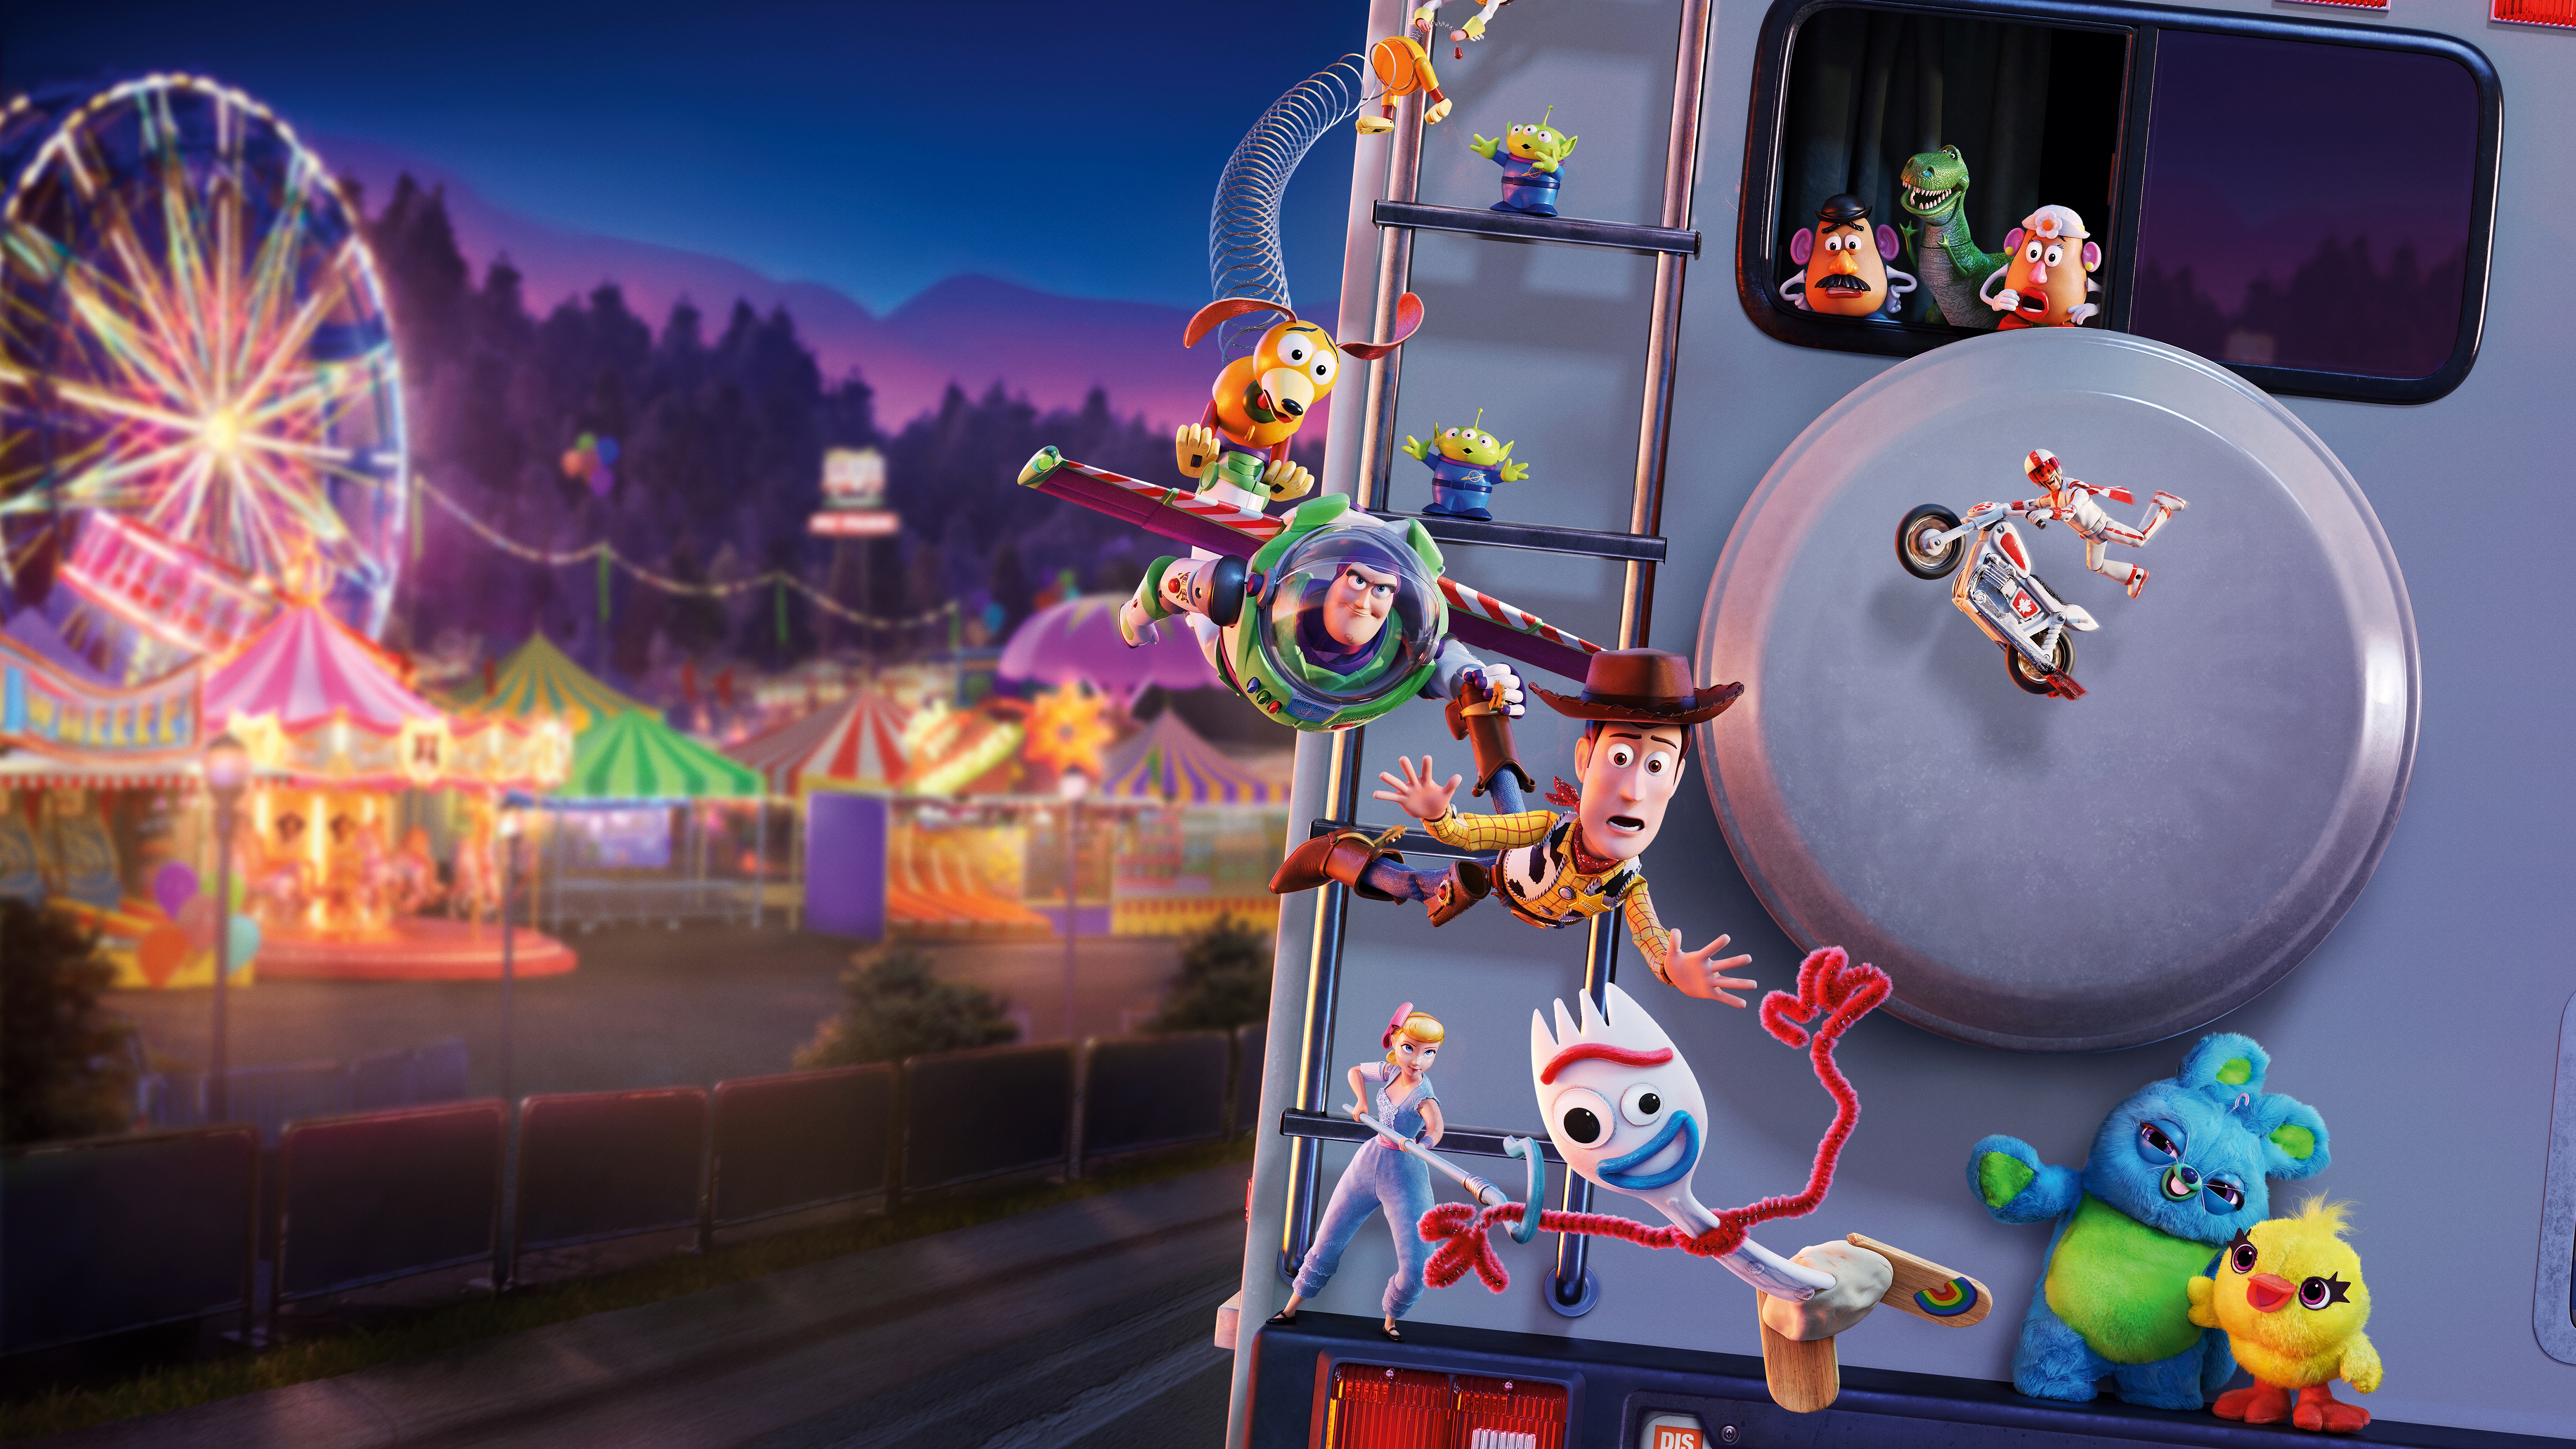 Movie Toy Story 4 HD Wallpaper | Background Image